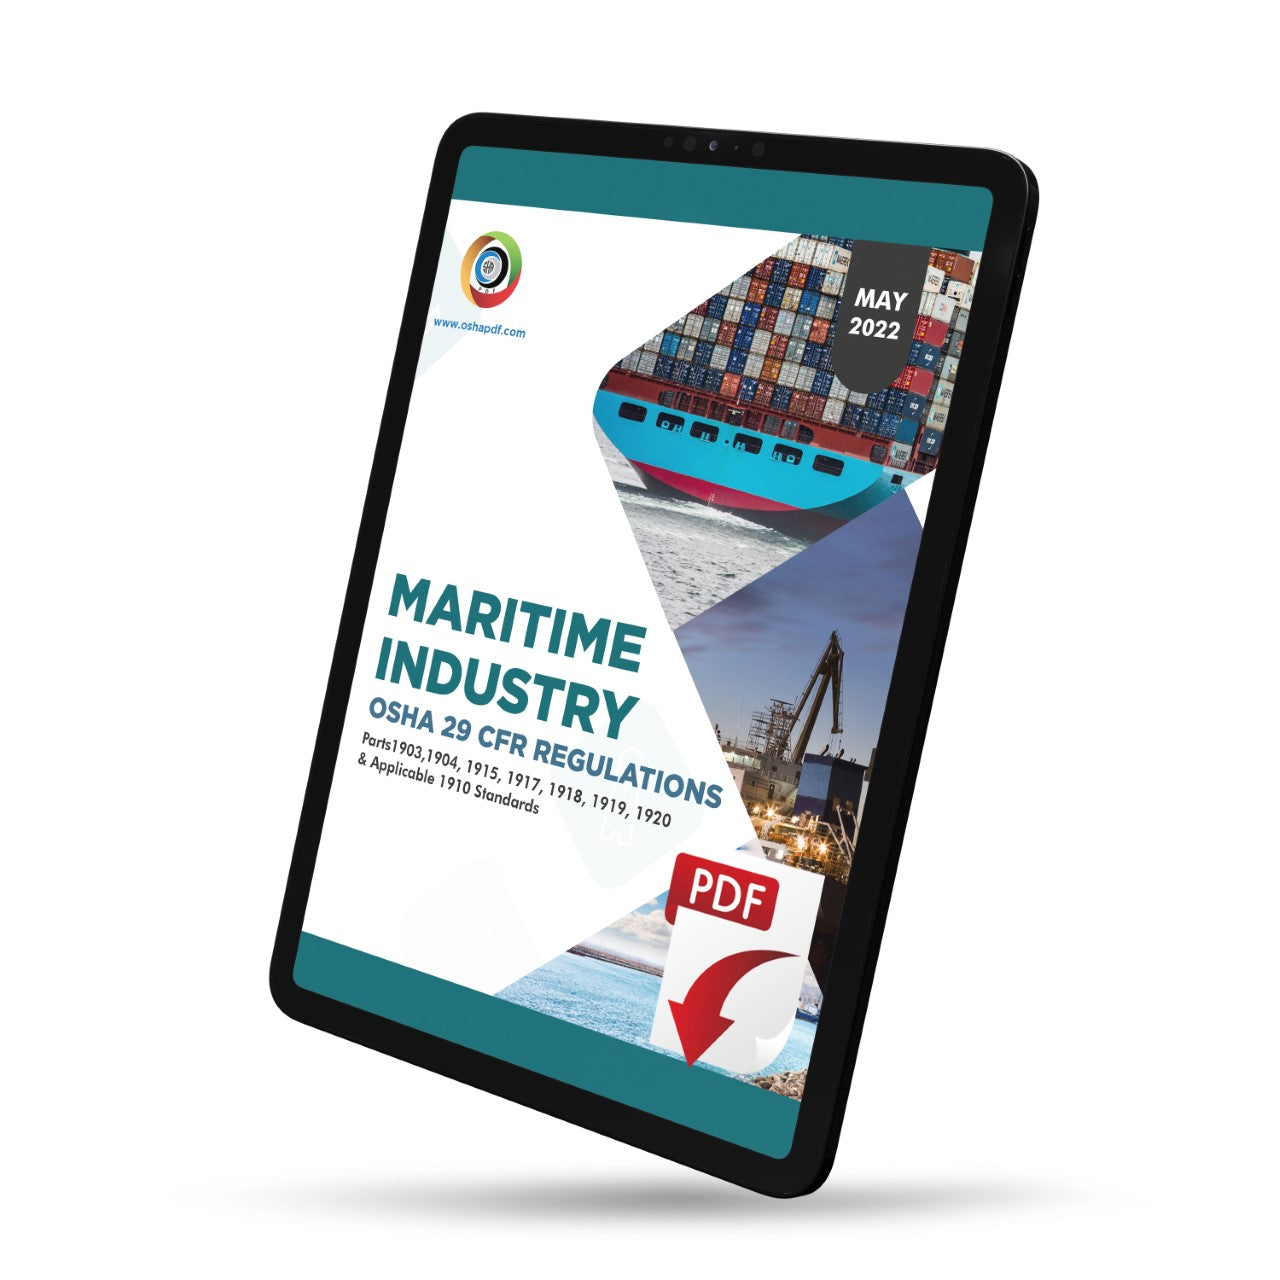 Maritime Industry Regulations - May 2022